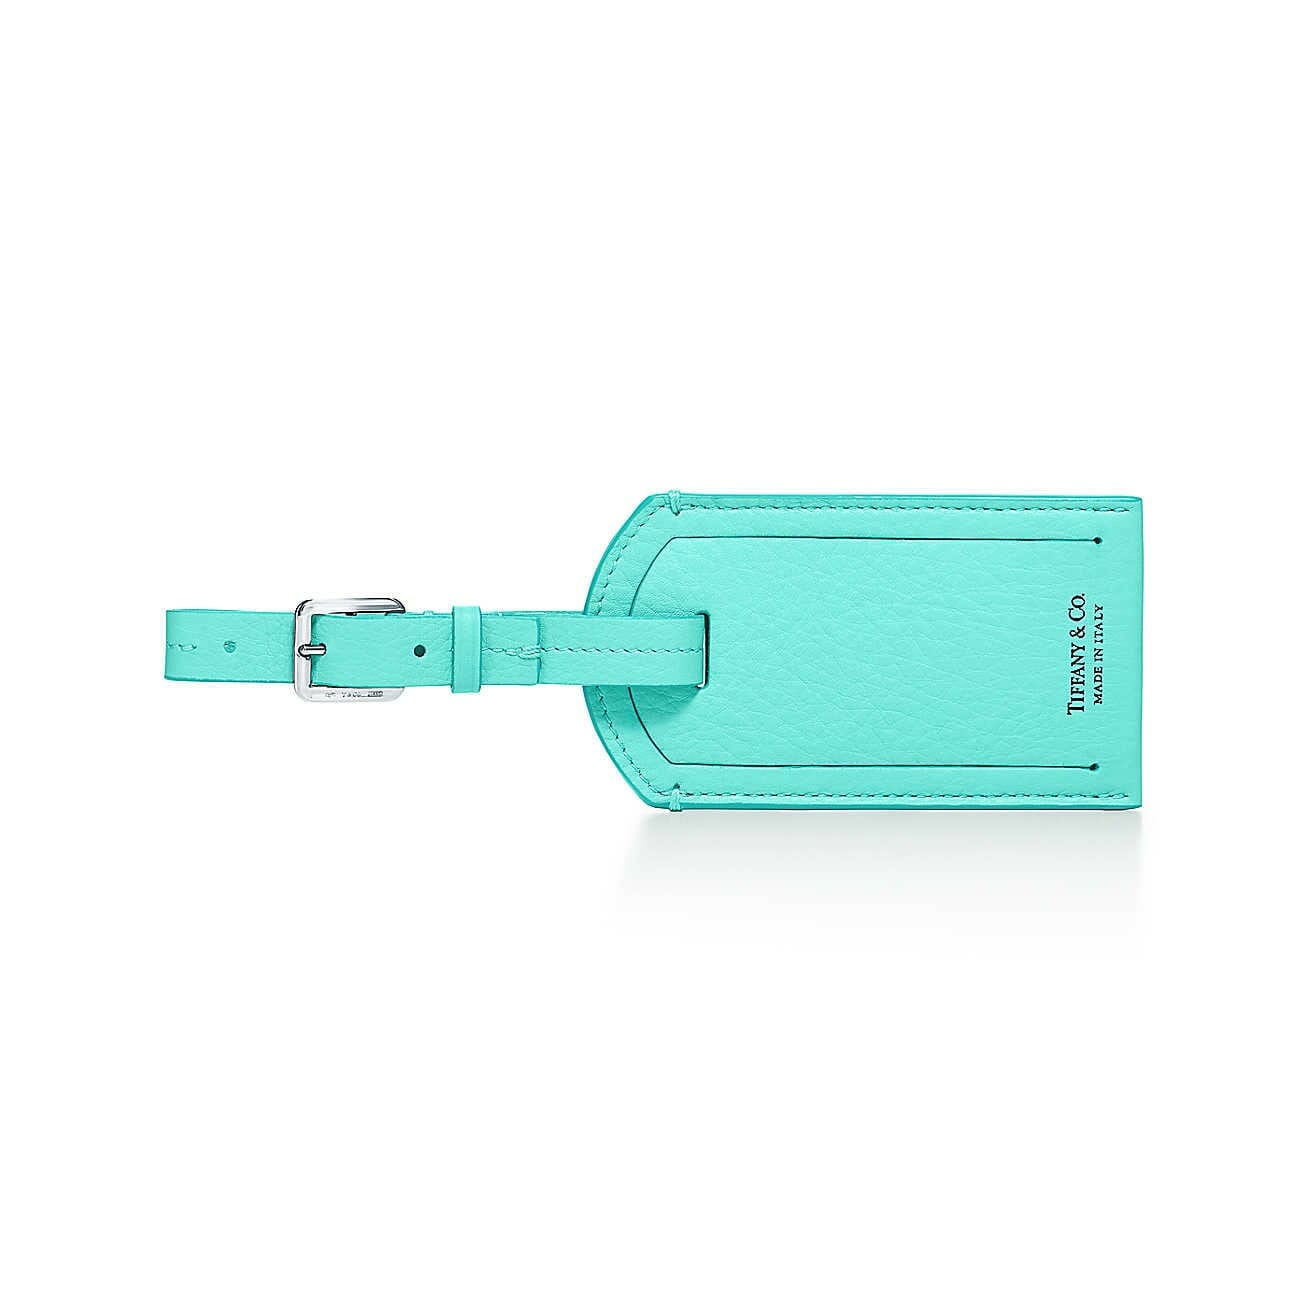 Mothers Day Gift ideas from Newport Living and Lifestyles Tiffany & Co. Luggage Tag $200